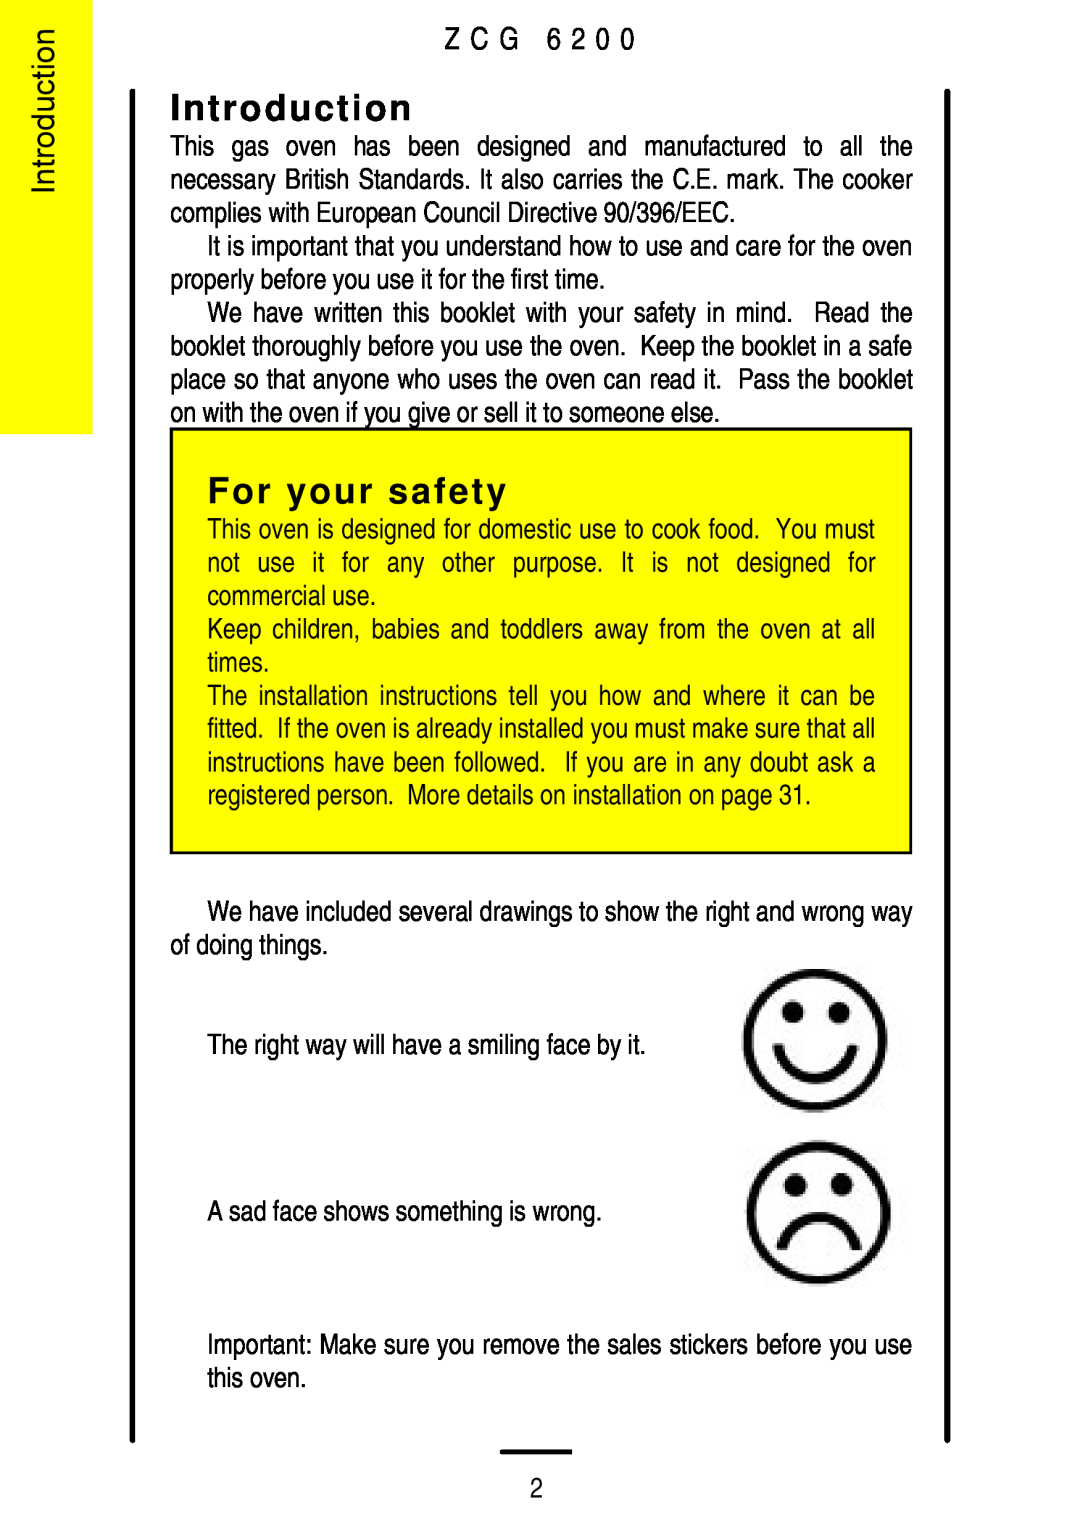 Zanussi ZCG 6200 installation instructions Introduction, For your safety, Z C G 